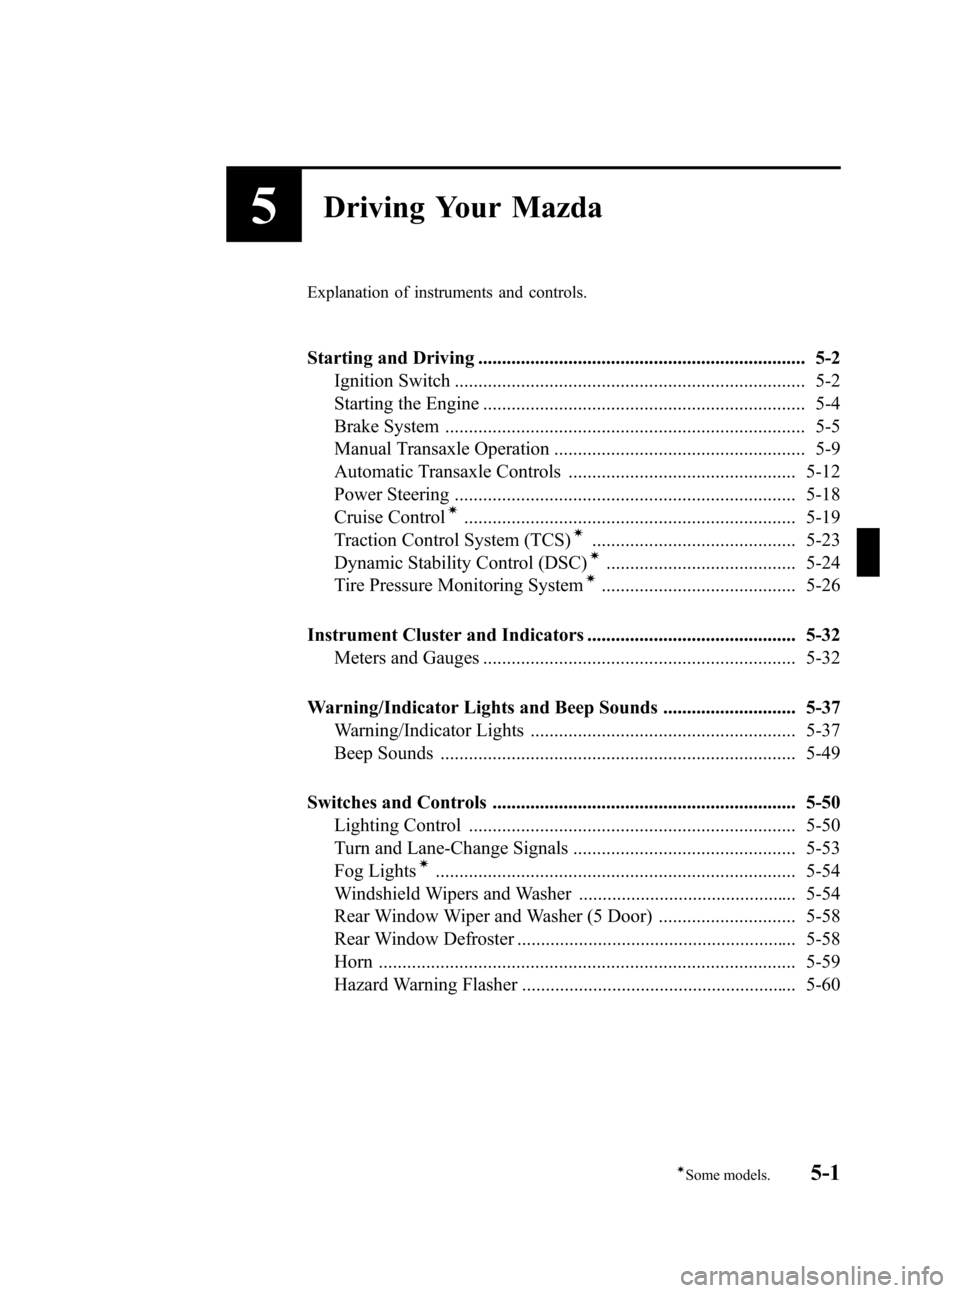 MAZDA MODEL 3 HATCHBACK 2008  Owners Manual (in English) Black plate (119,1)
5Driving Your Mazda
Explanation of instruments and controls.
Starting and Driving ..................................................................... 5-2
Ignition Switch ........